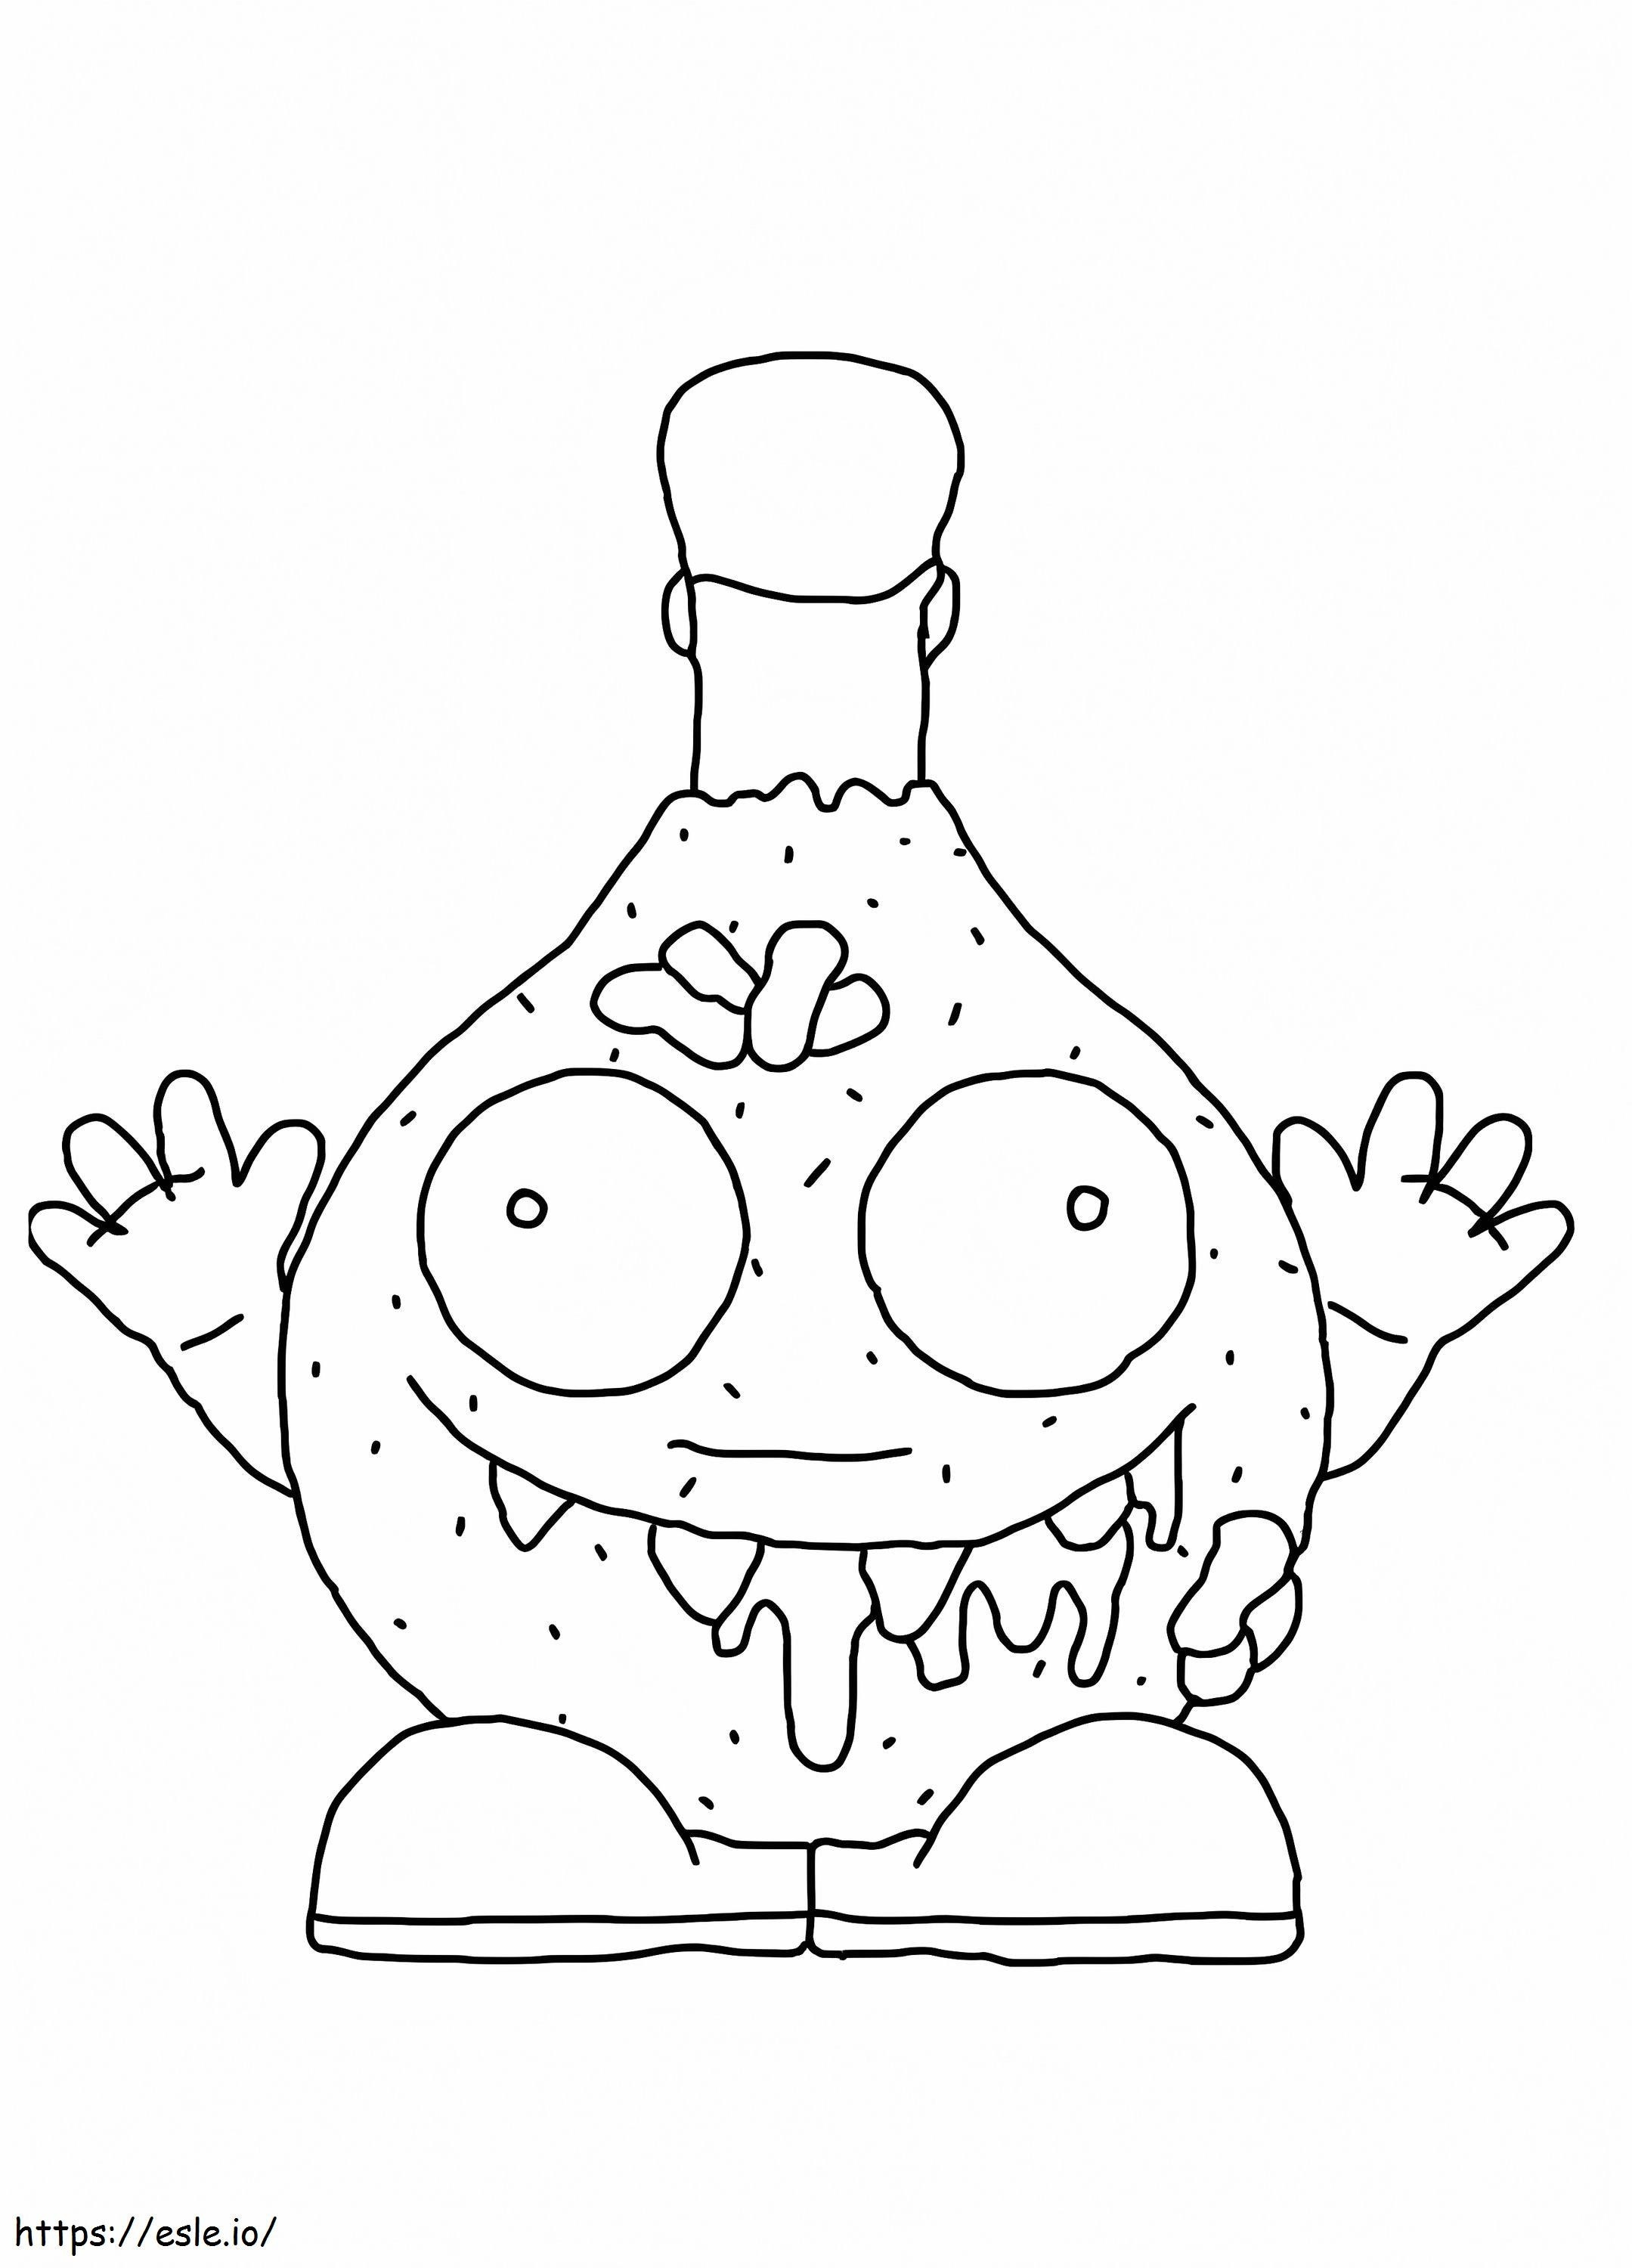 Trash Pack For Boy coloring page